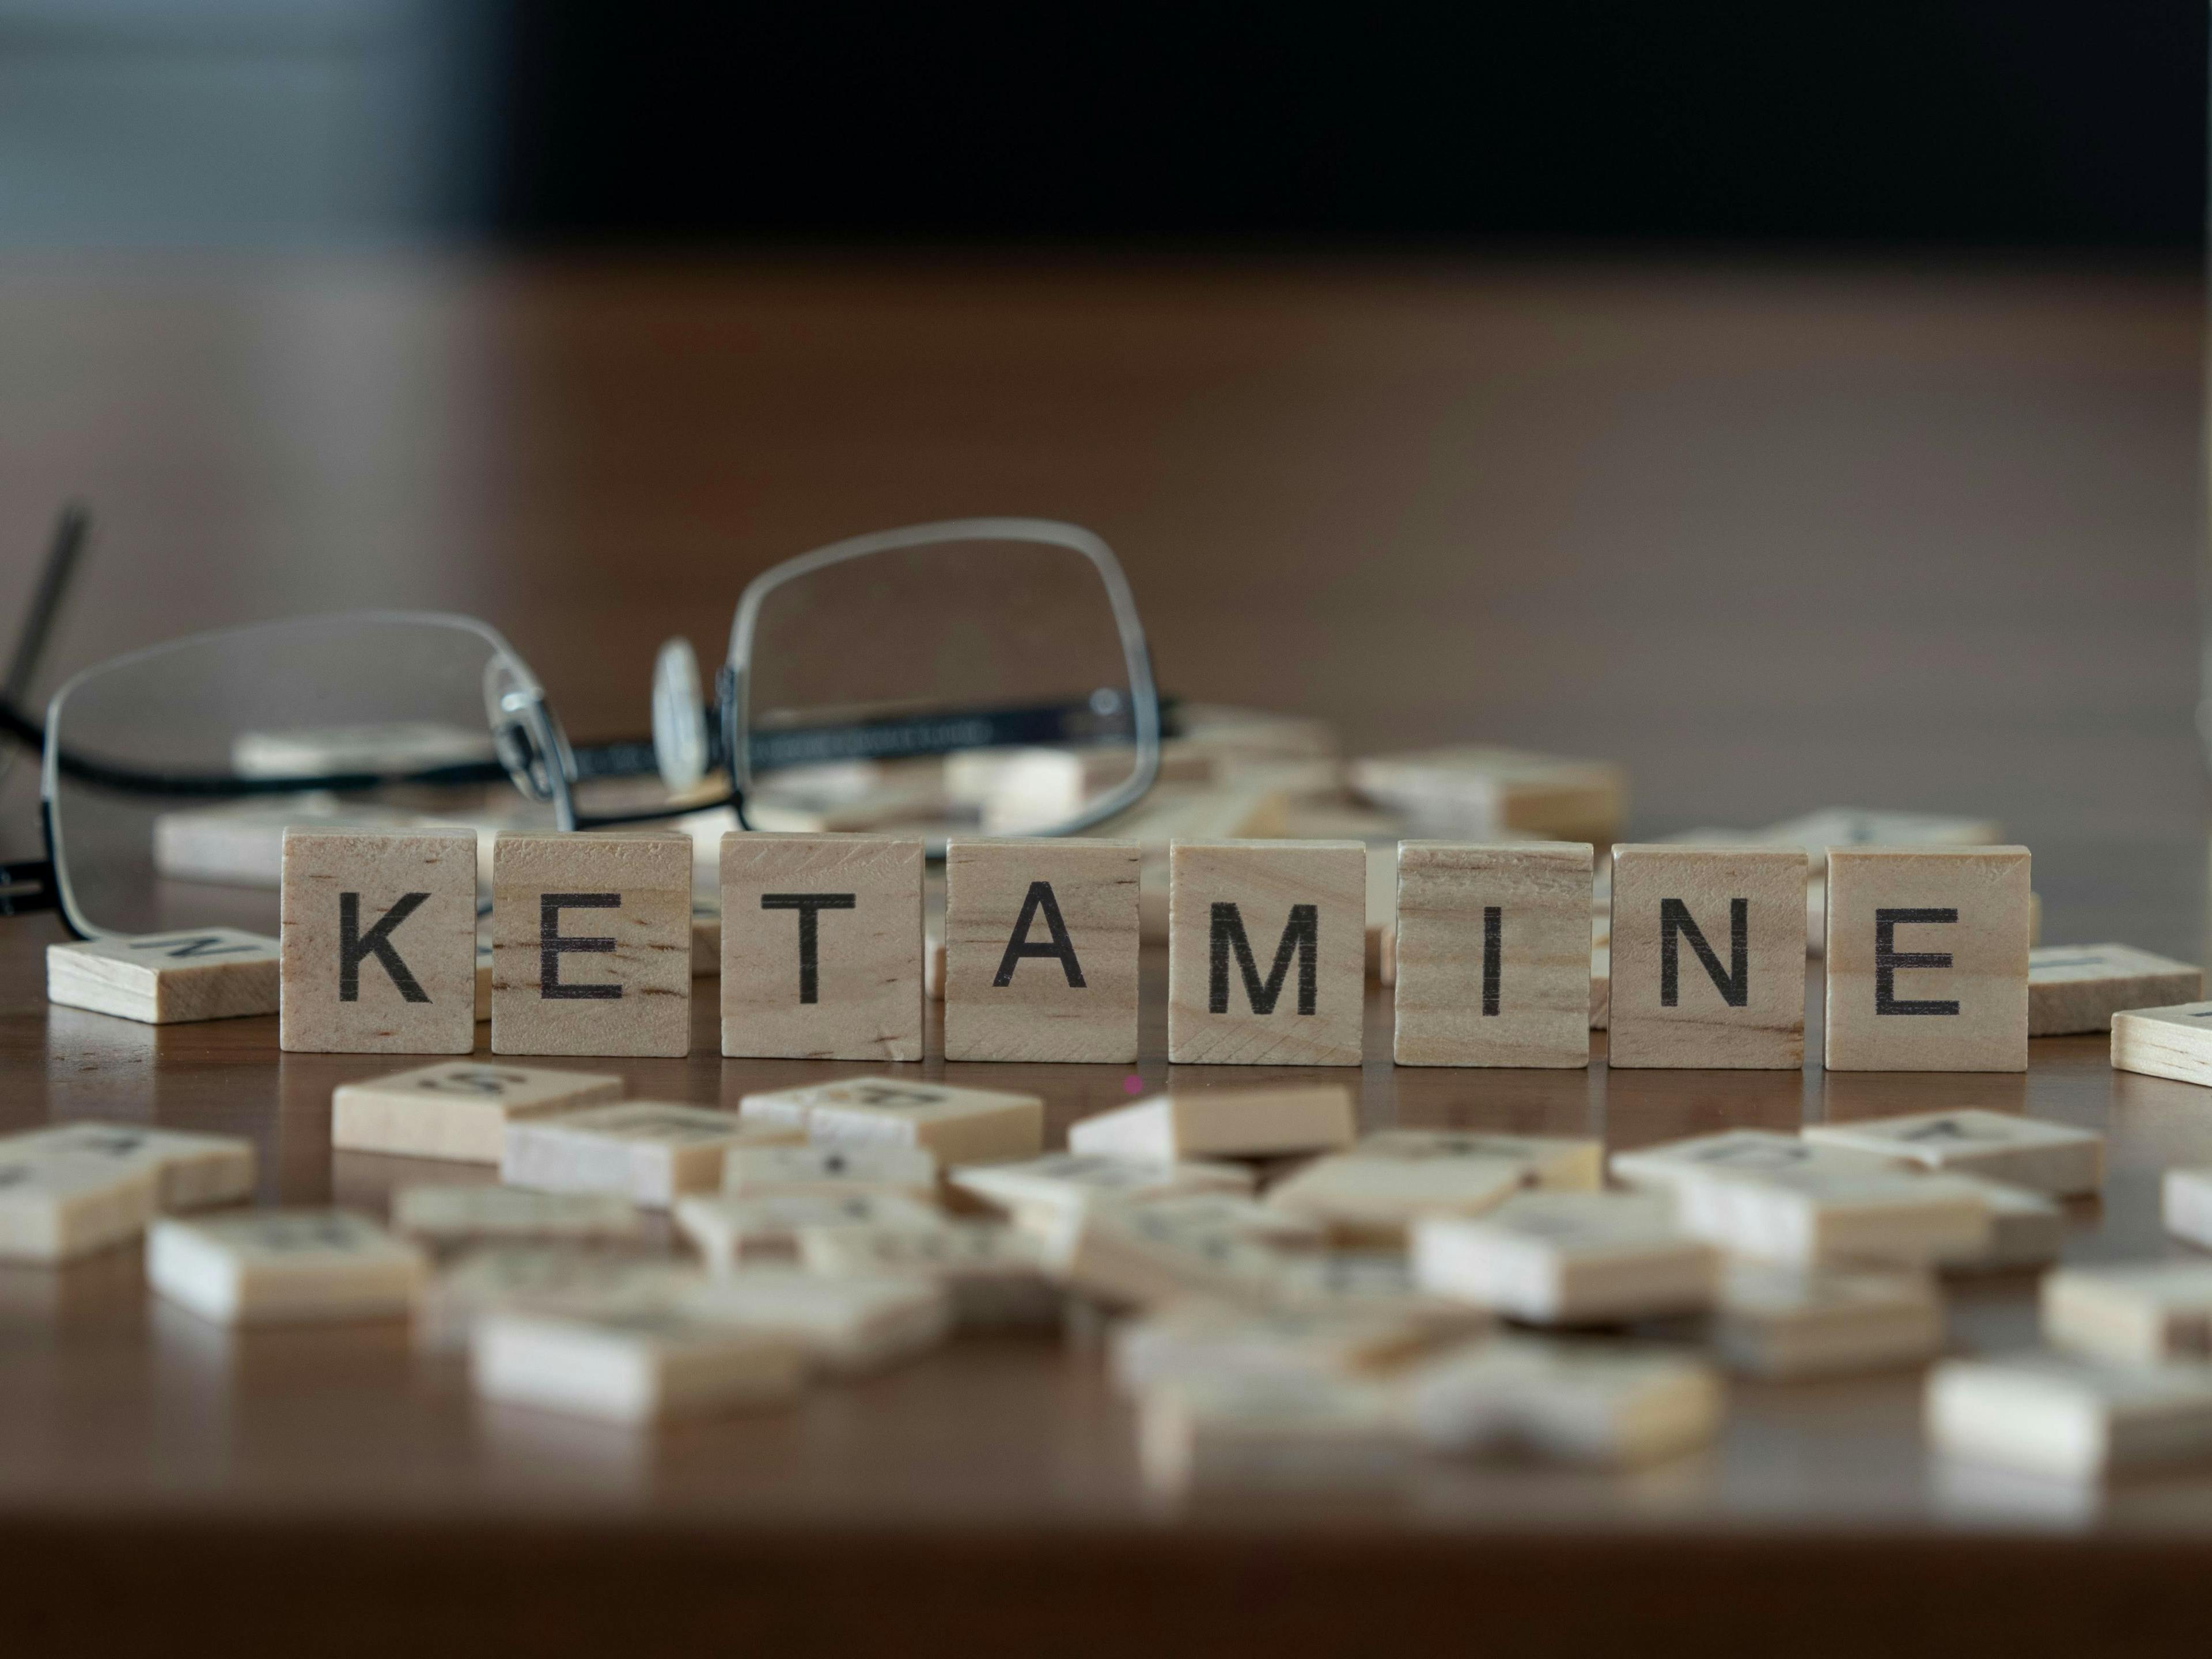 Does route of administration affect antidepressant efficacy of ketamine? Researchers performed a meta-analysis of trials comparing intravenous and intranasal administration.